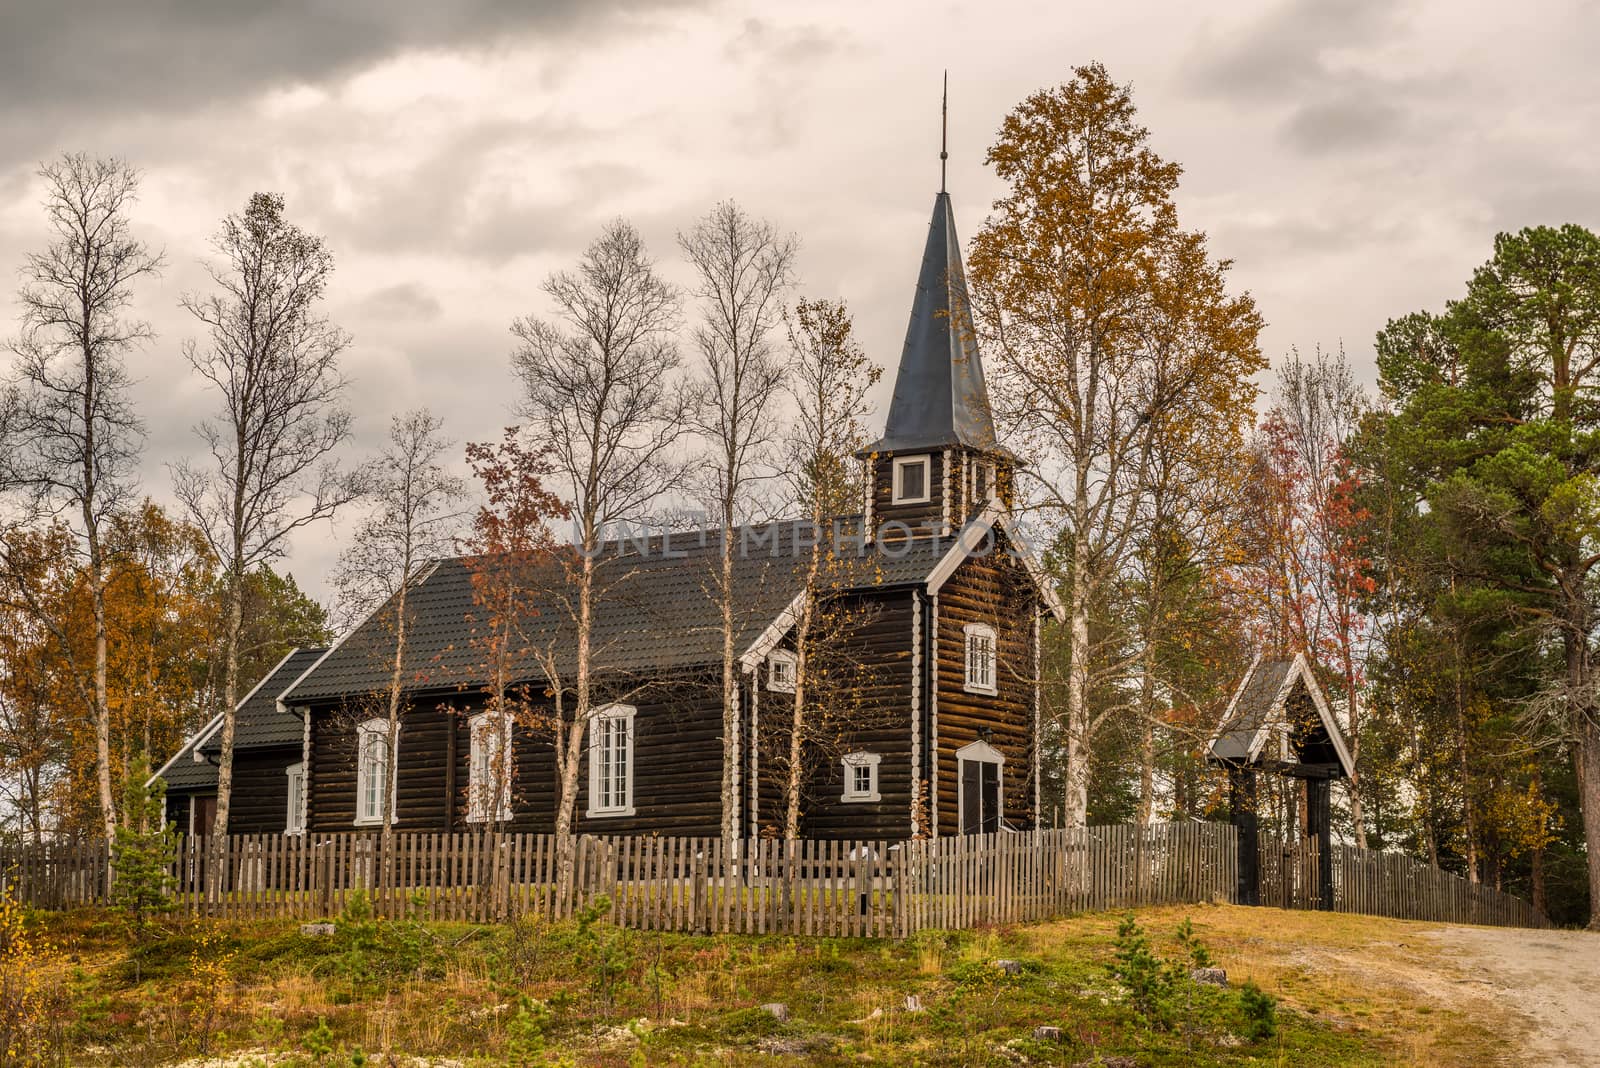 Historic church in Somadal, Hedmark, Norway set in an autumn setting.